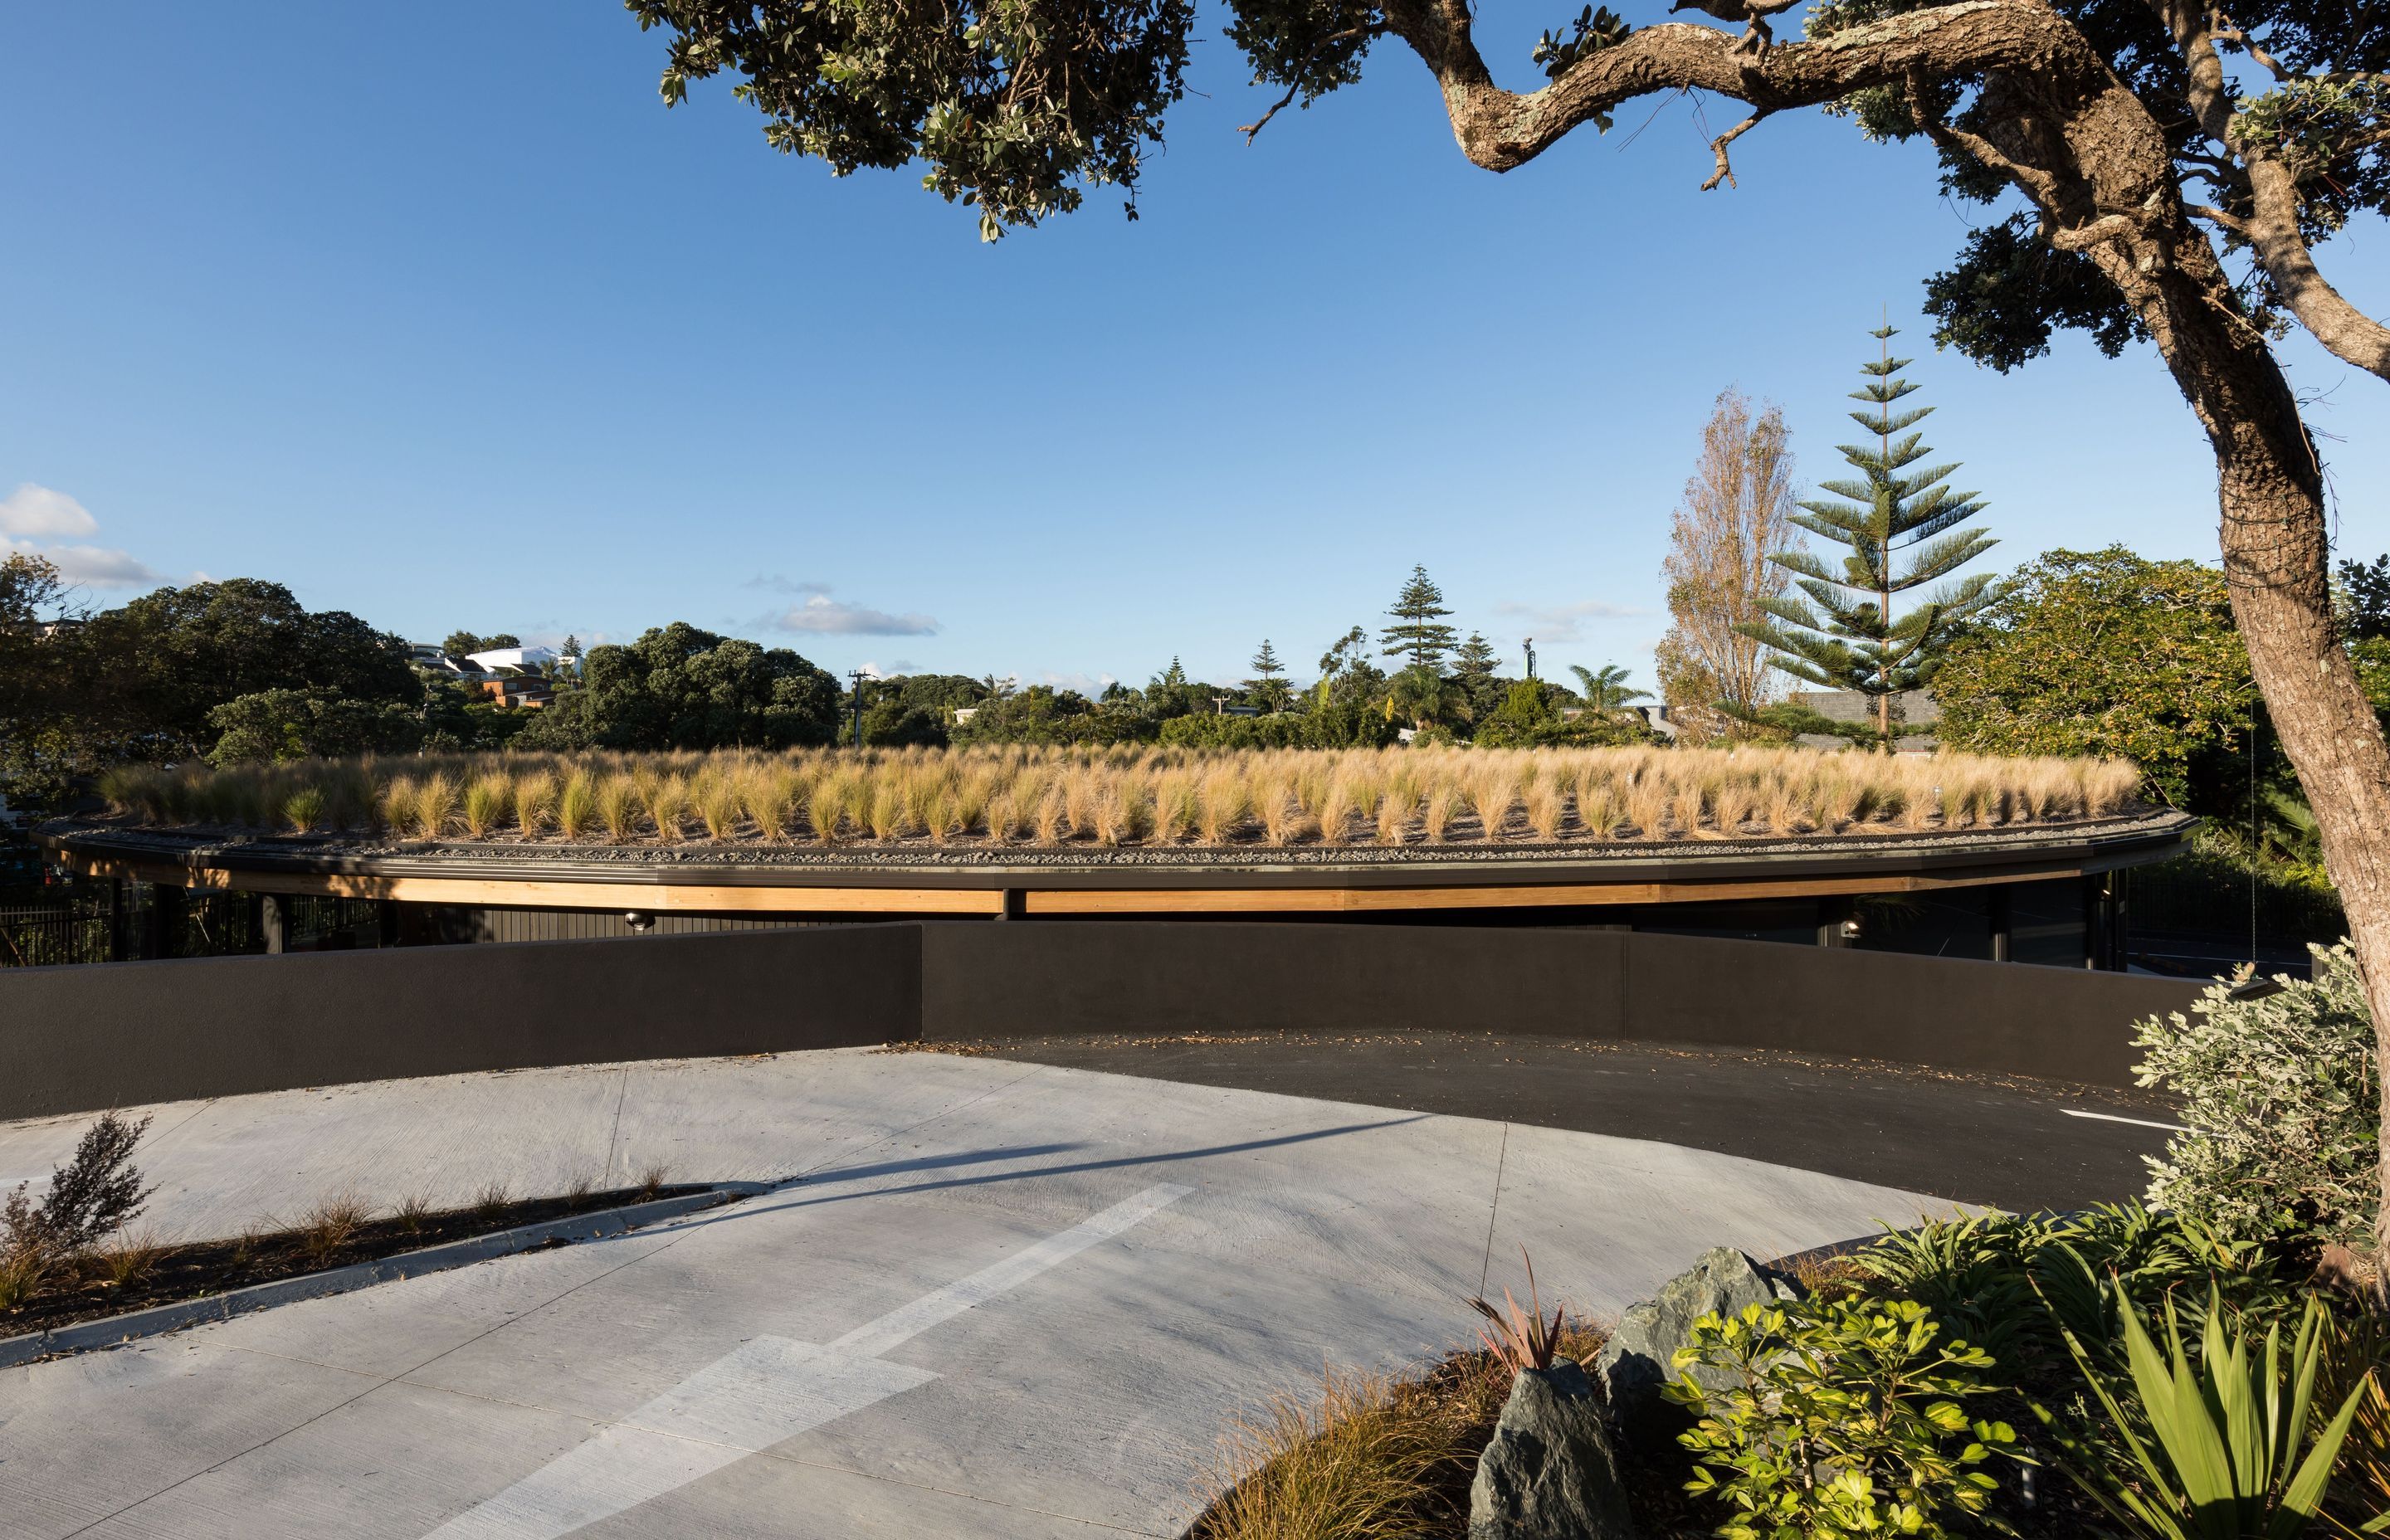 The view upon arrival, overlooking the green roof. | Photographer: Mark Scowen